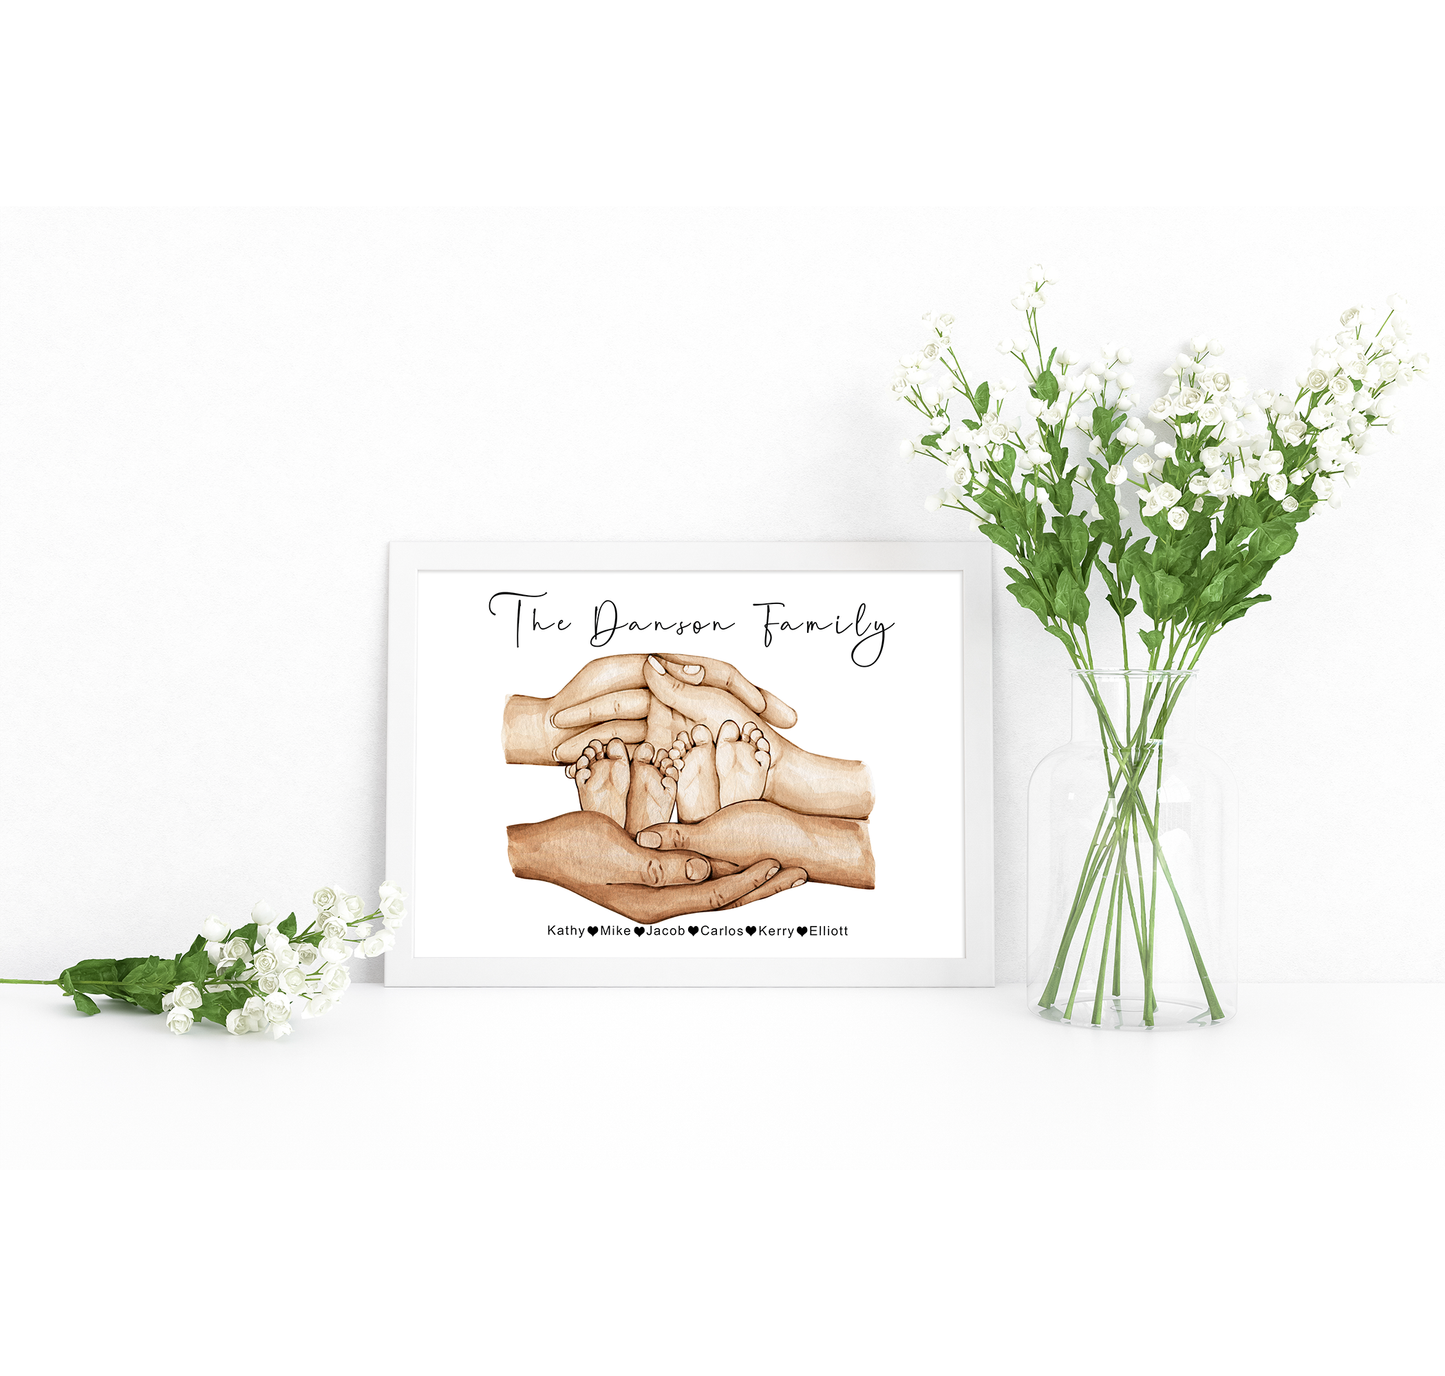 Baby feet in parents hands | New parents portrait with baby, twins or triplets | Natural skin tones or Black and white | A3 | A4 | A5 | Greeting card